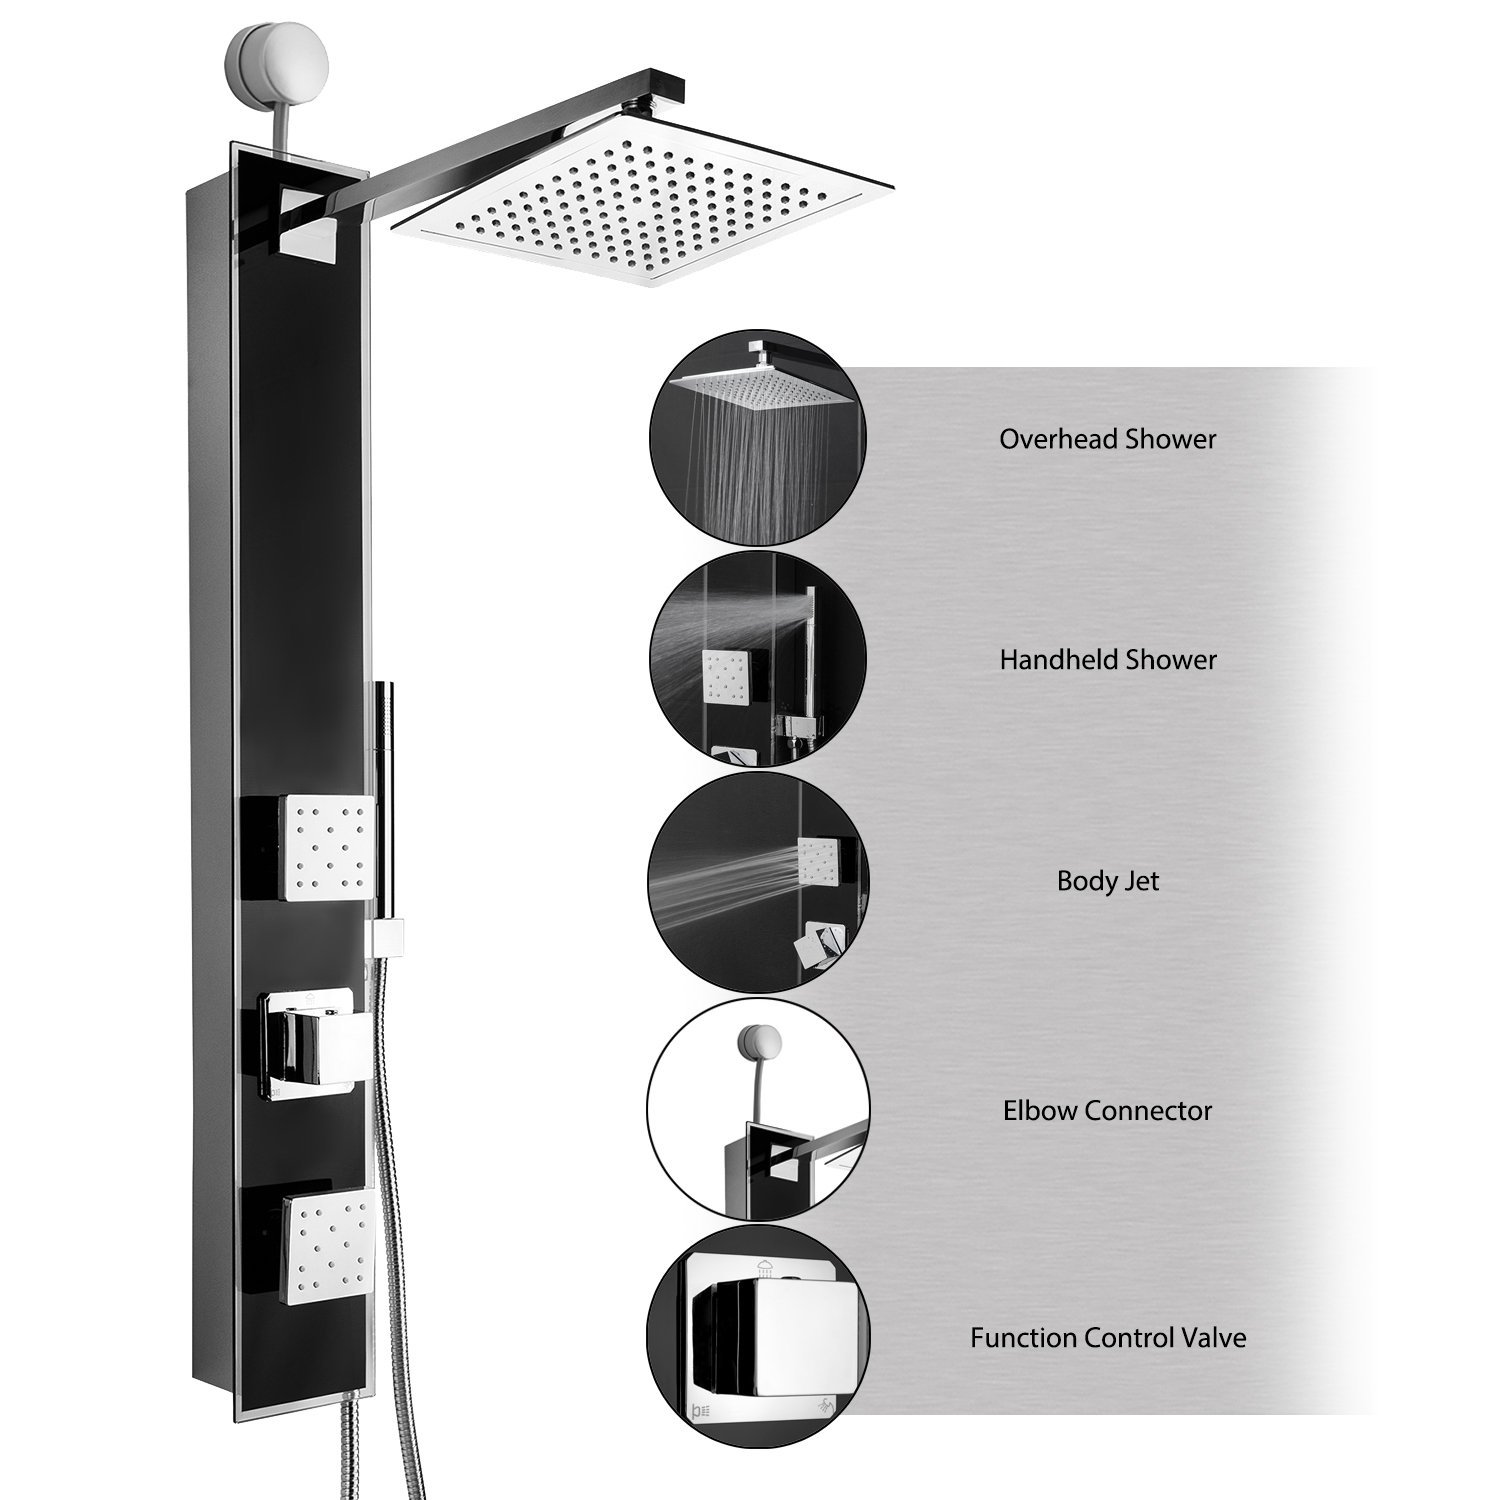 AKDY 35" Black Tempered Glass Wall Mount Easy Connection Bathroom Multi-Function Shower Tower Panel w/ Rainfall Head Dual Massage Sprays